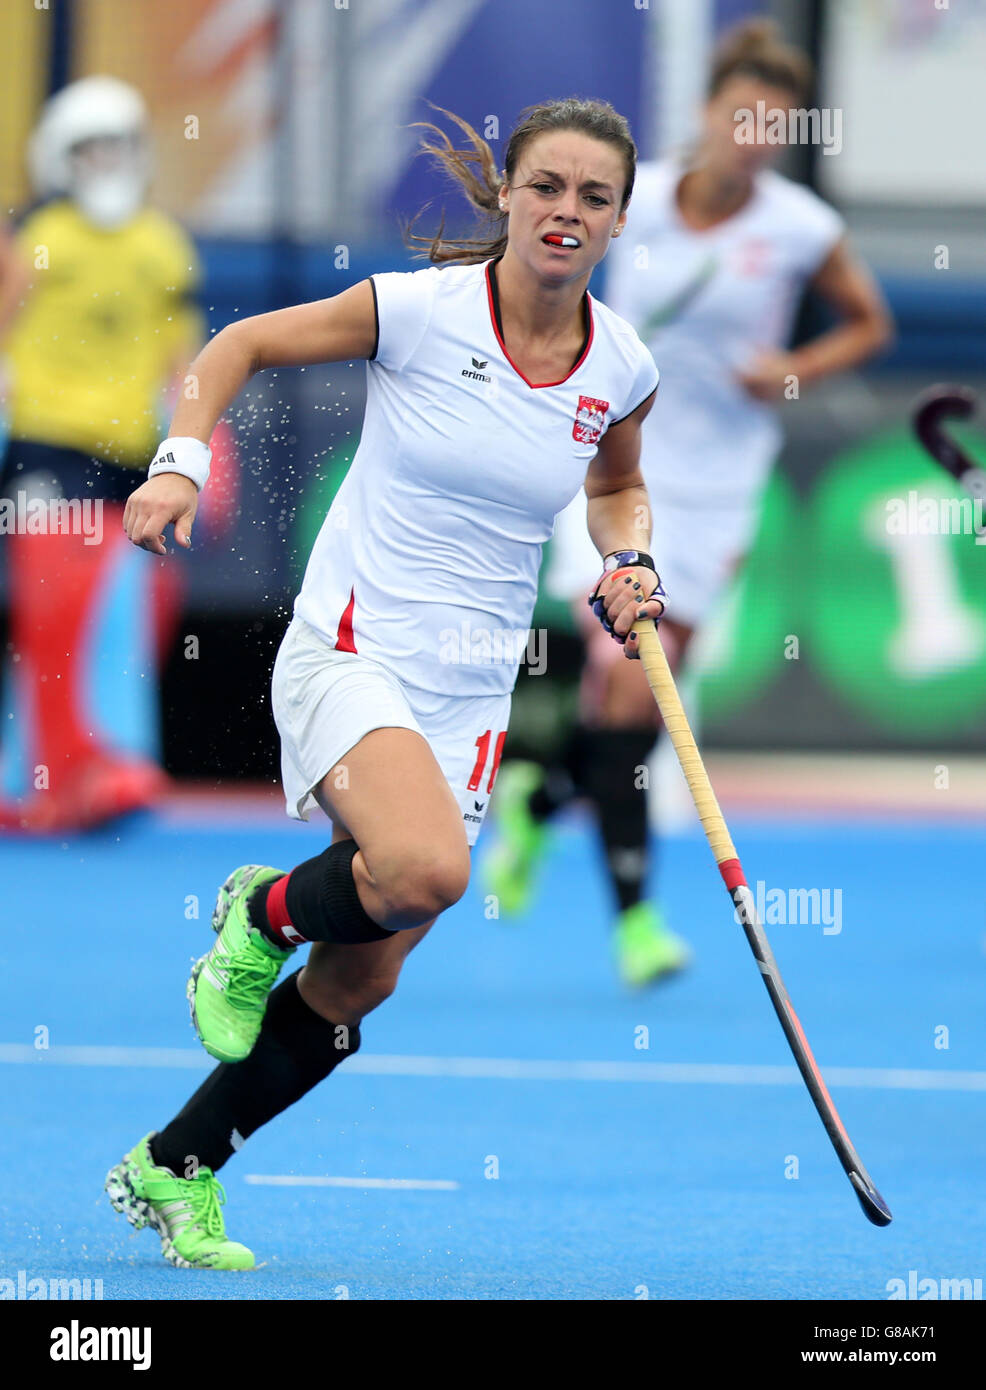 Poland's Marlena Rybacha during the Pool C Classification match at the Lee Valley Hockey and Tennis Centre, London. PRESS ASSOCIATION Photo. Picture date: Sunday August 30, 2015. Photo credit should read: Simon Cooper/PA Wire Stock Photo